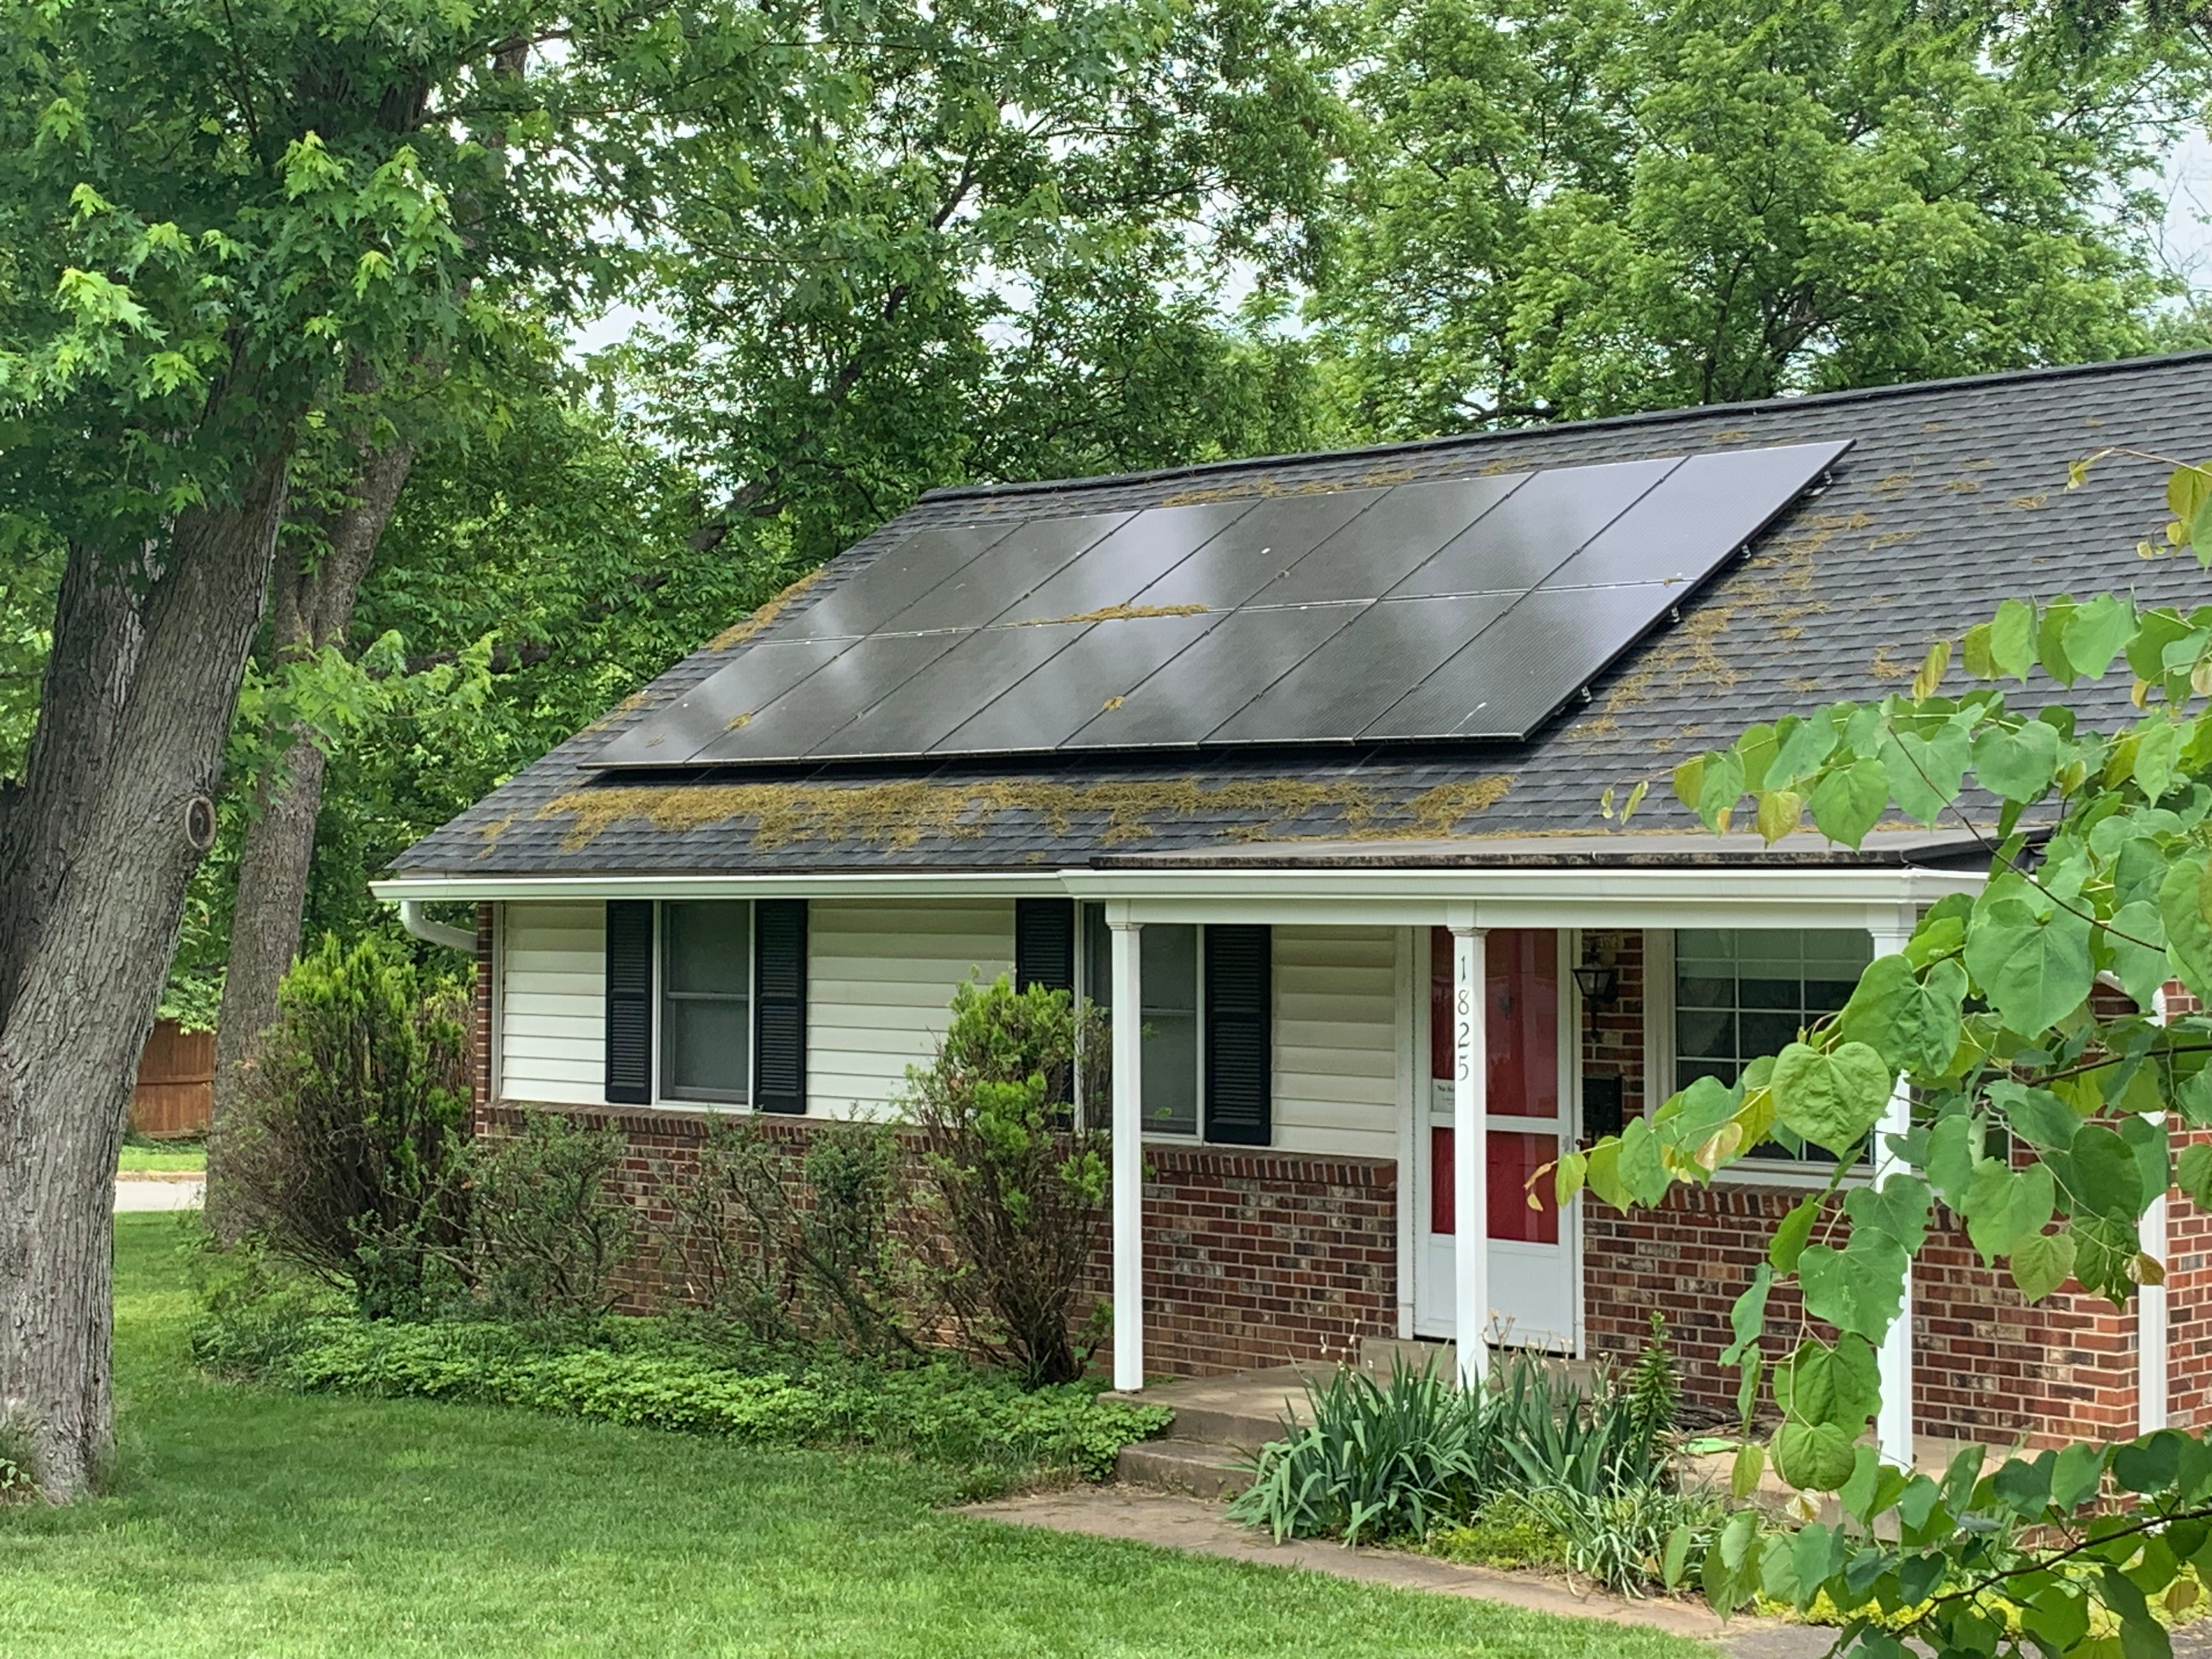 Falls Church homes are going solar